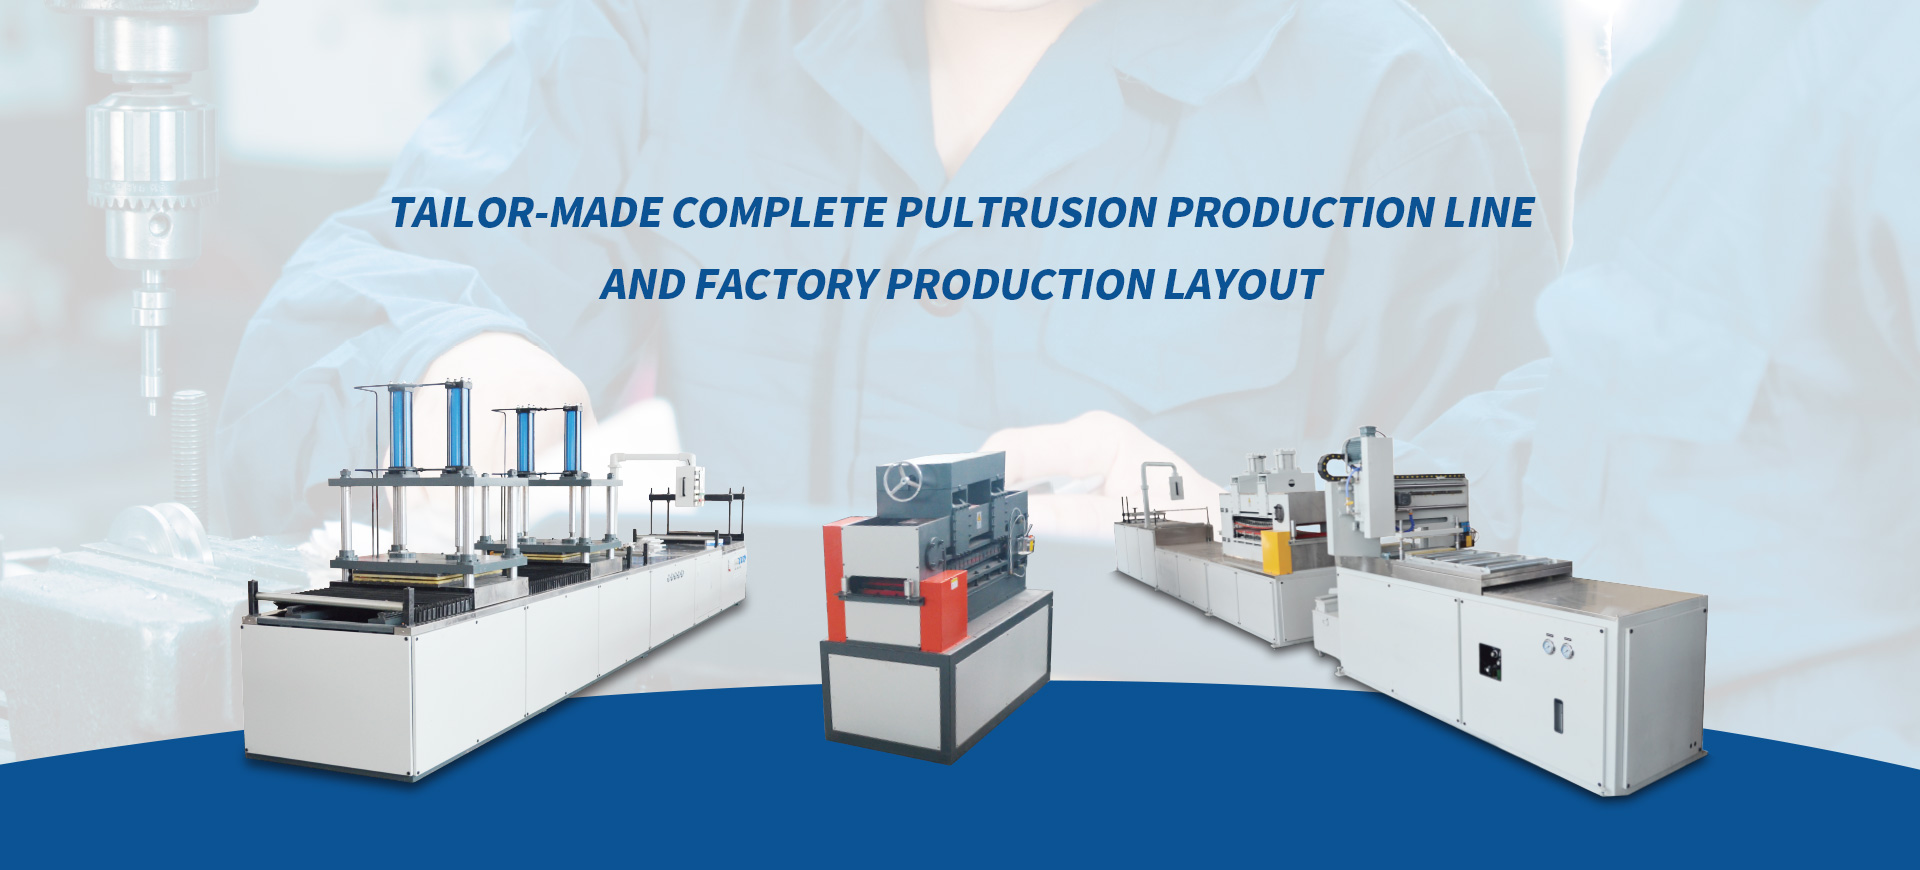 Tailor-made complete pultrusion production line and factory production layout